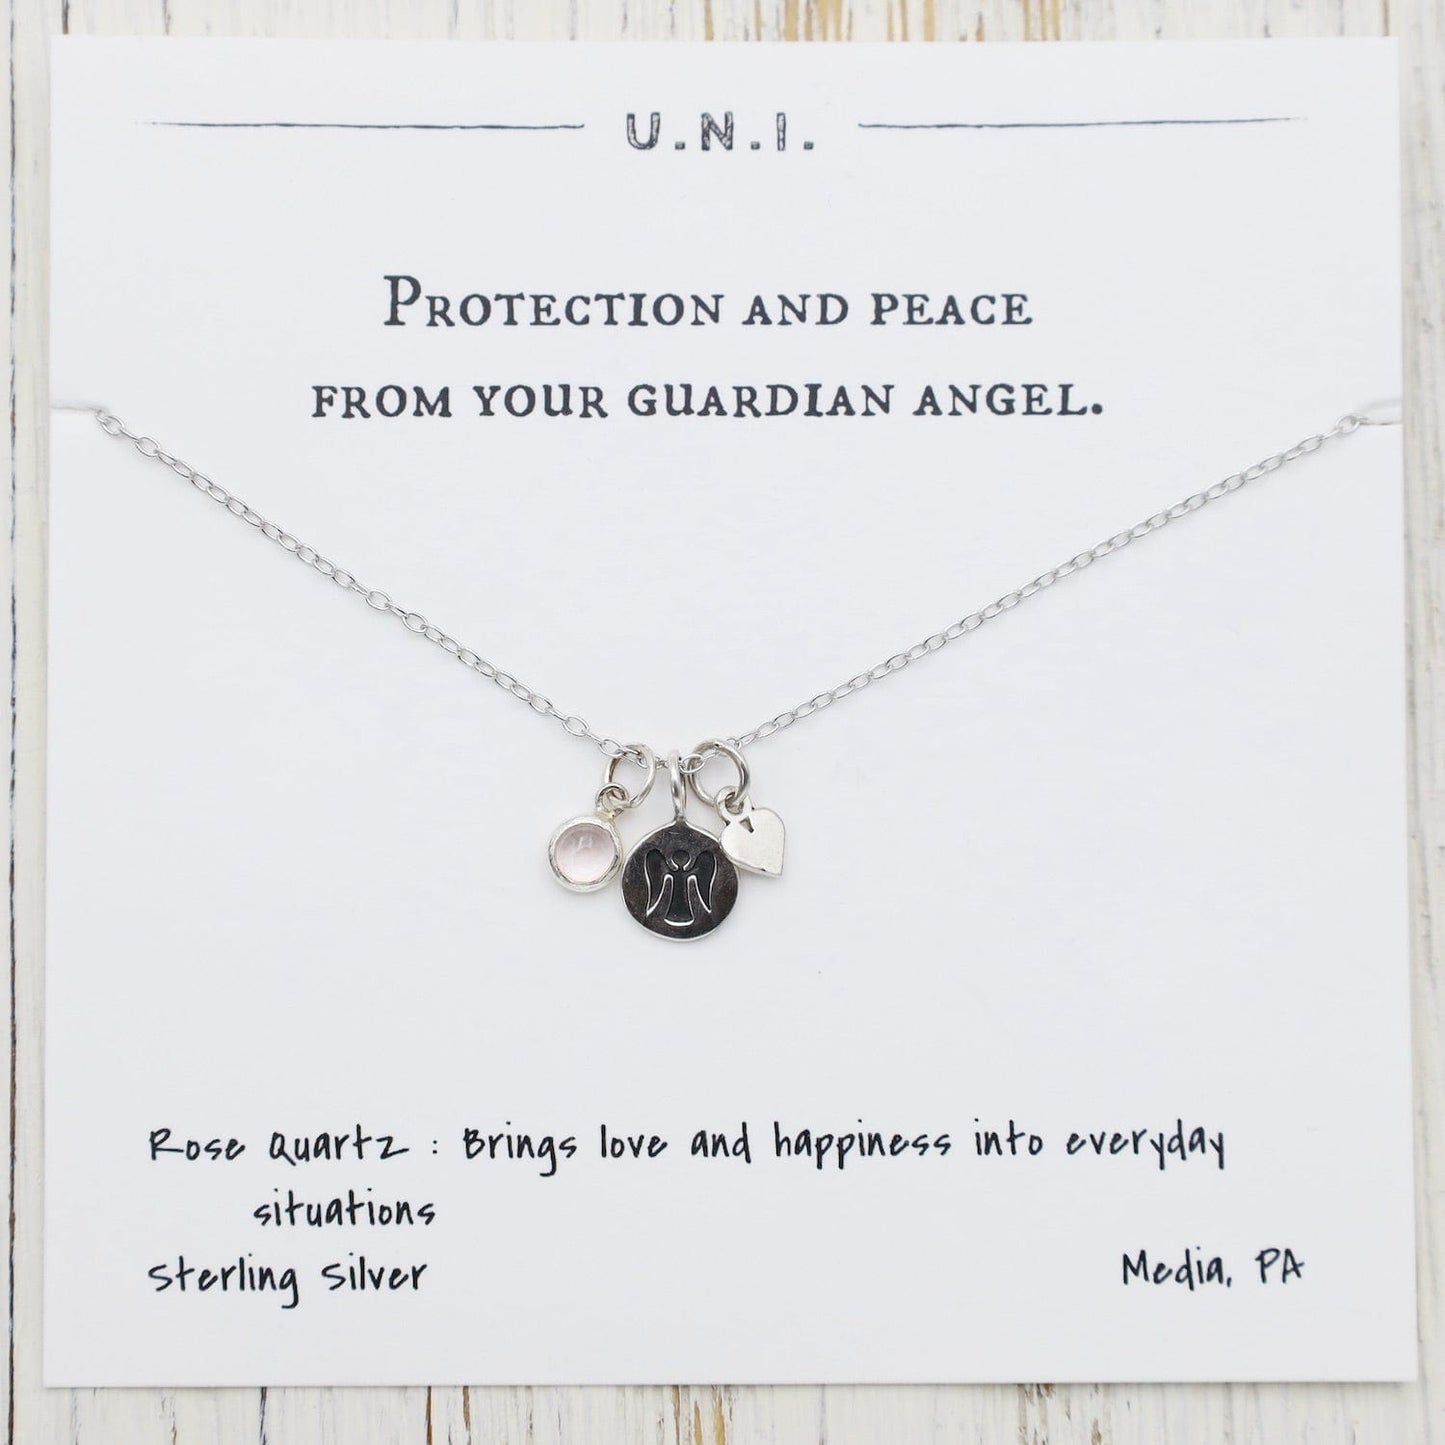 NKL Protection & Peace From Your Guardian Angel Necklace